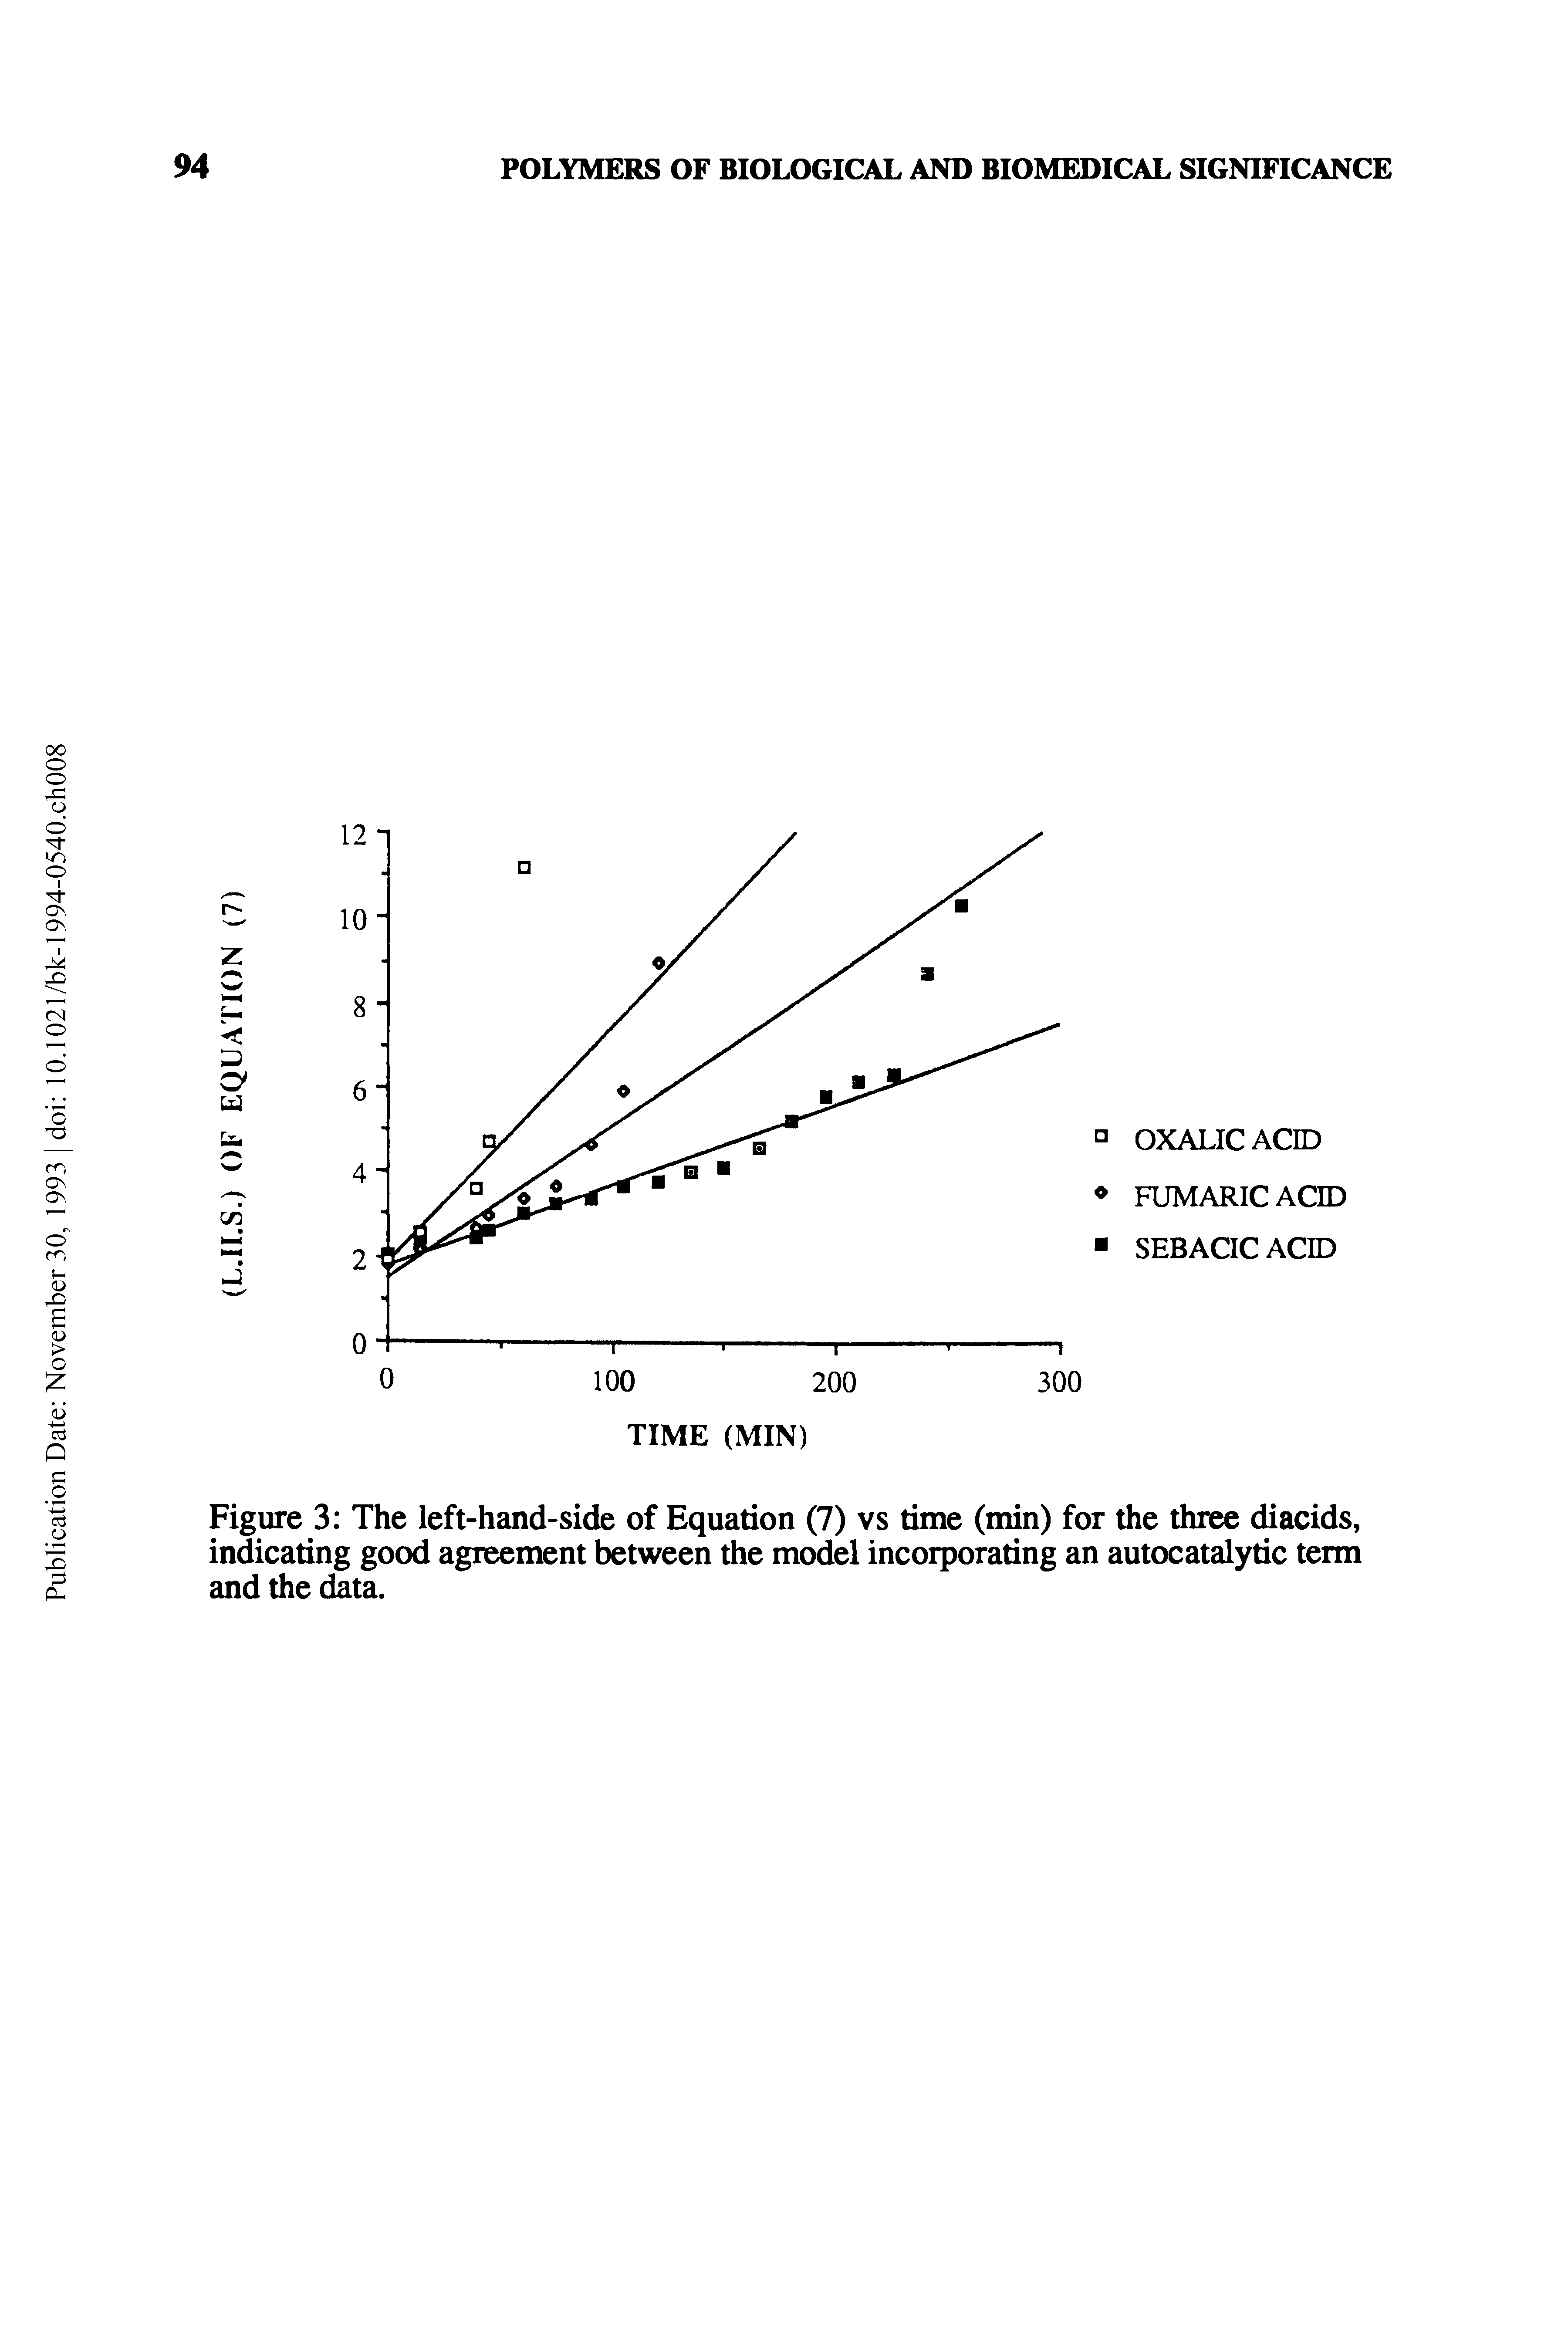 Figure 3 The left-hand-side of Equation (7) vs time (min) for the three diacids, indicating good agreement between the model incorporating an autocatalytic term and the data.